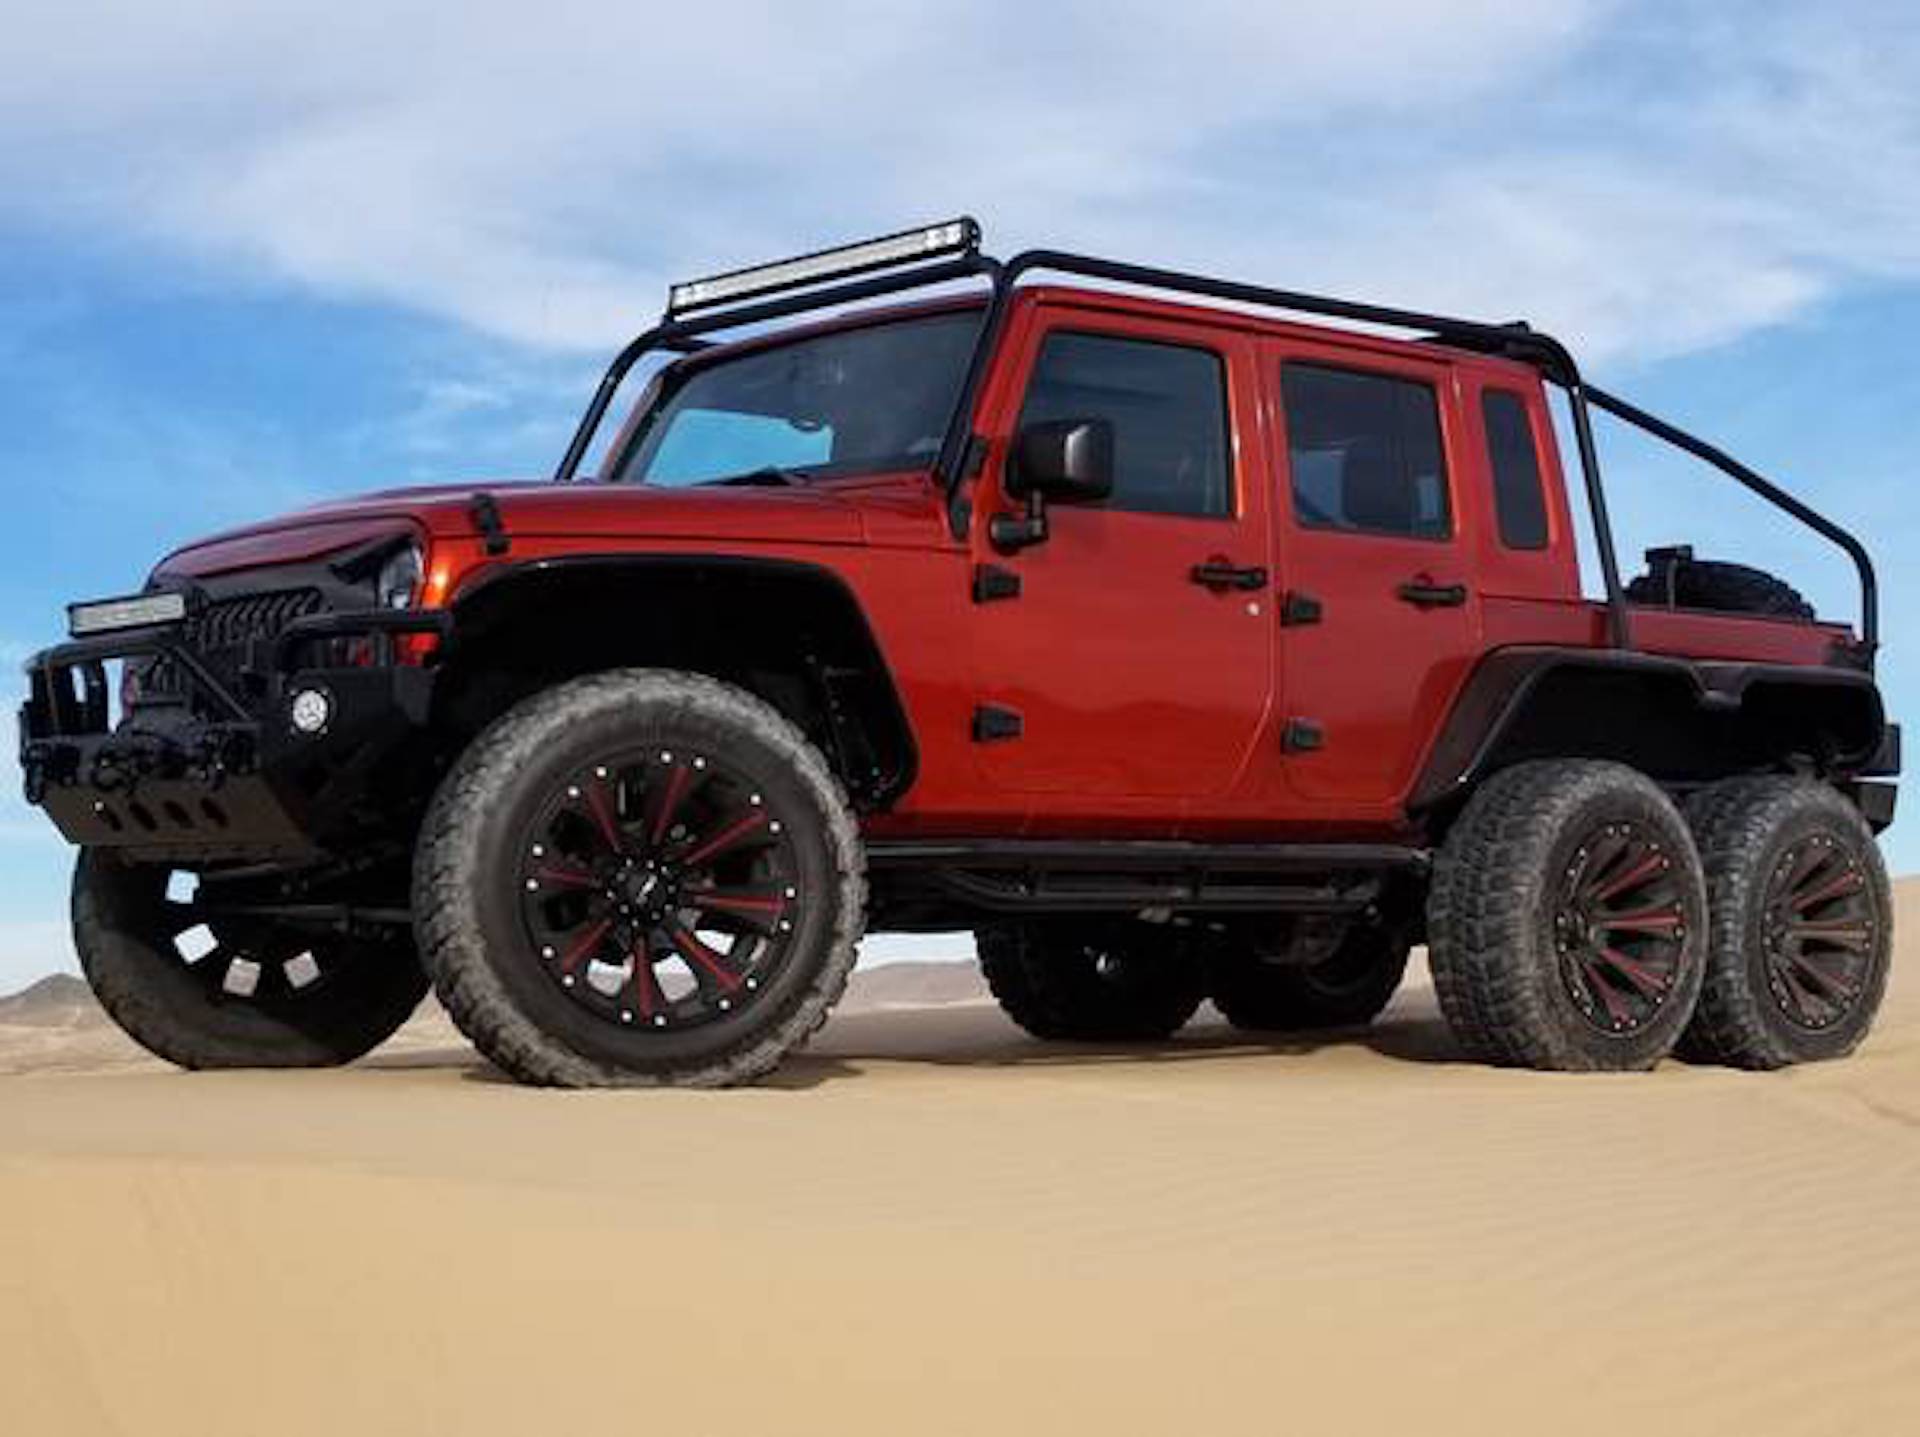 This is not a drill: Jeep Wrangler 6x6 with 707-hp Hellcat V-8 exists